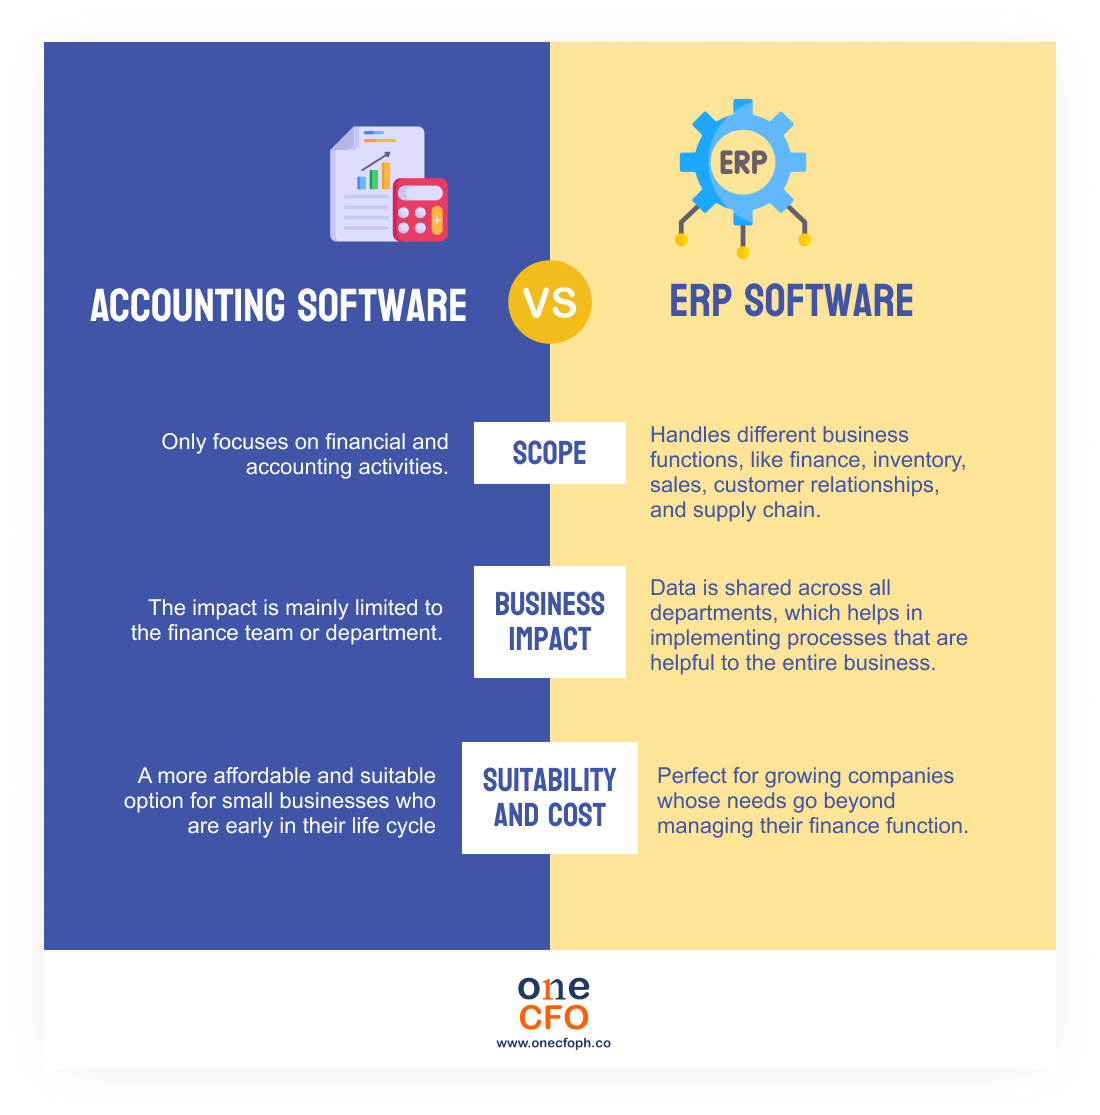 Accounting software vs ERP software: Key differences